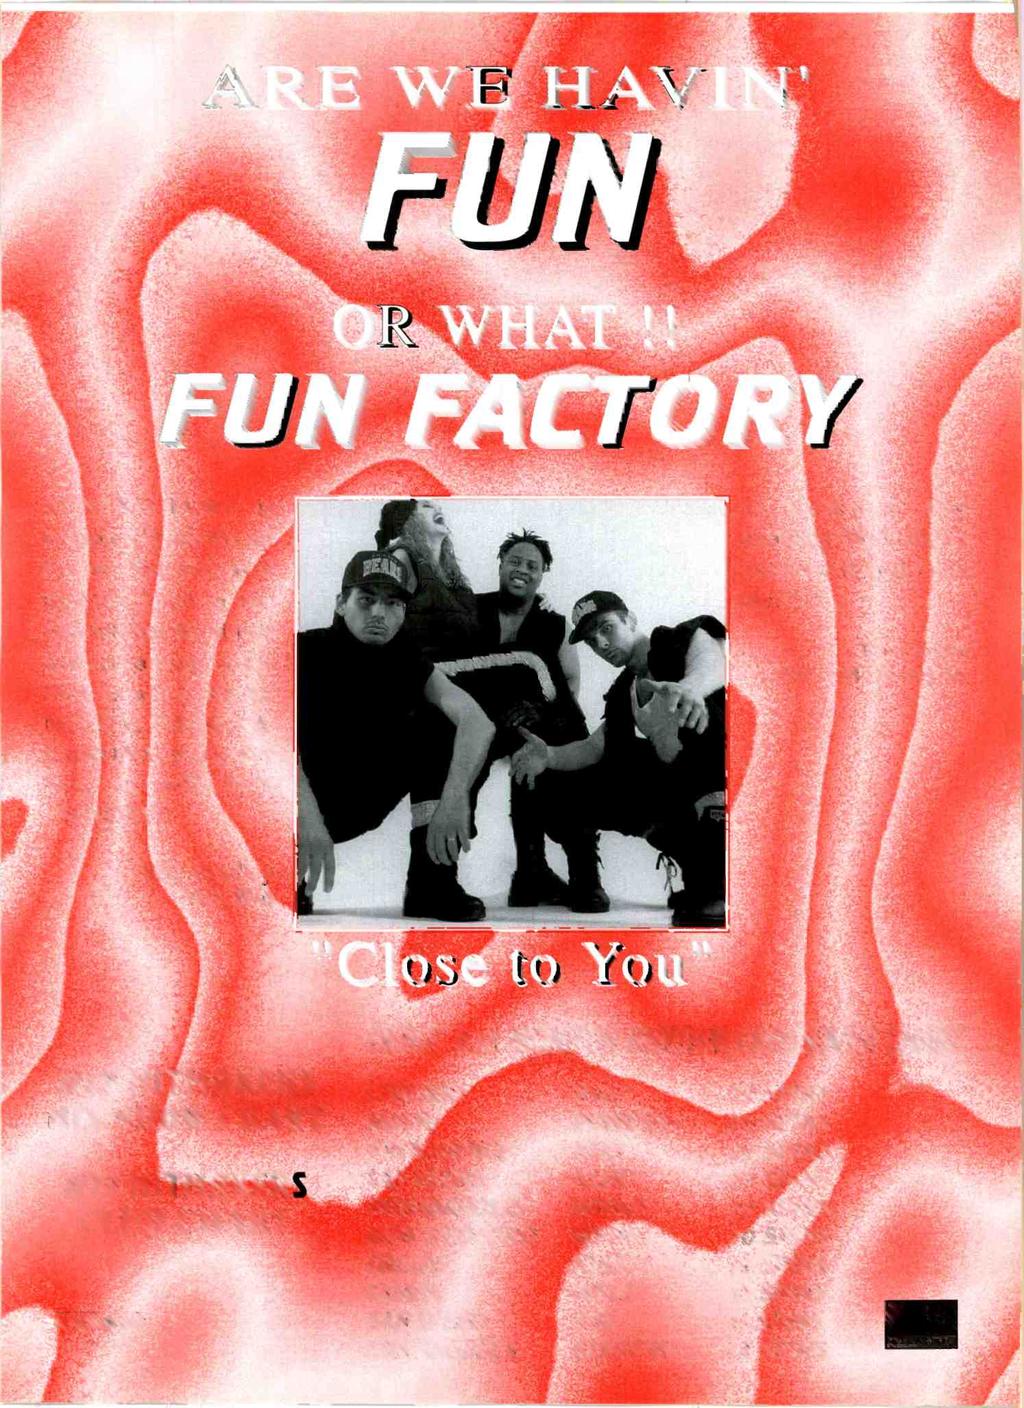 EAT 1 /1,--T/1 /PArti:4)7 FUN FACTORY is completely blown up for us.